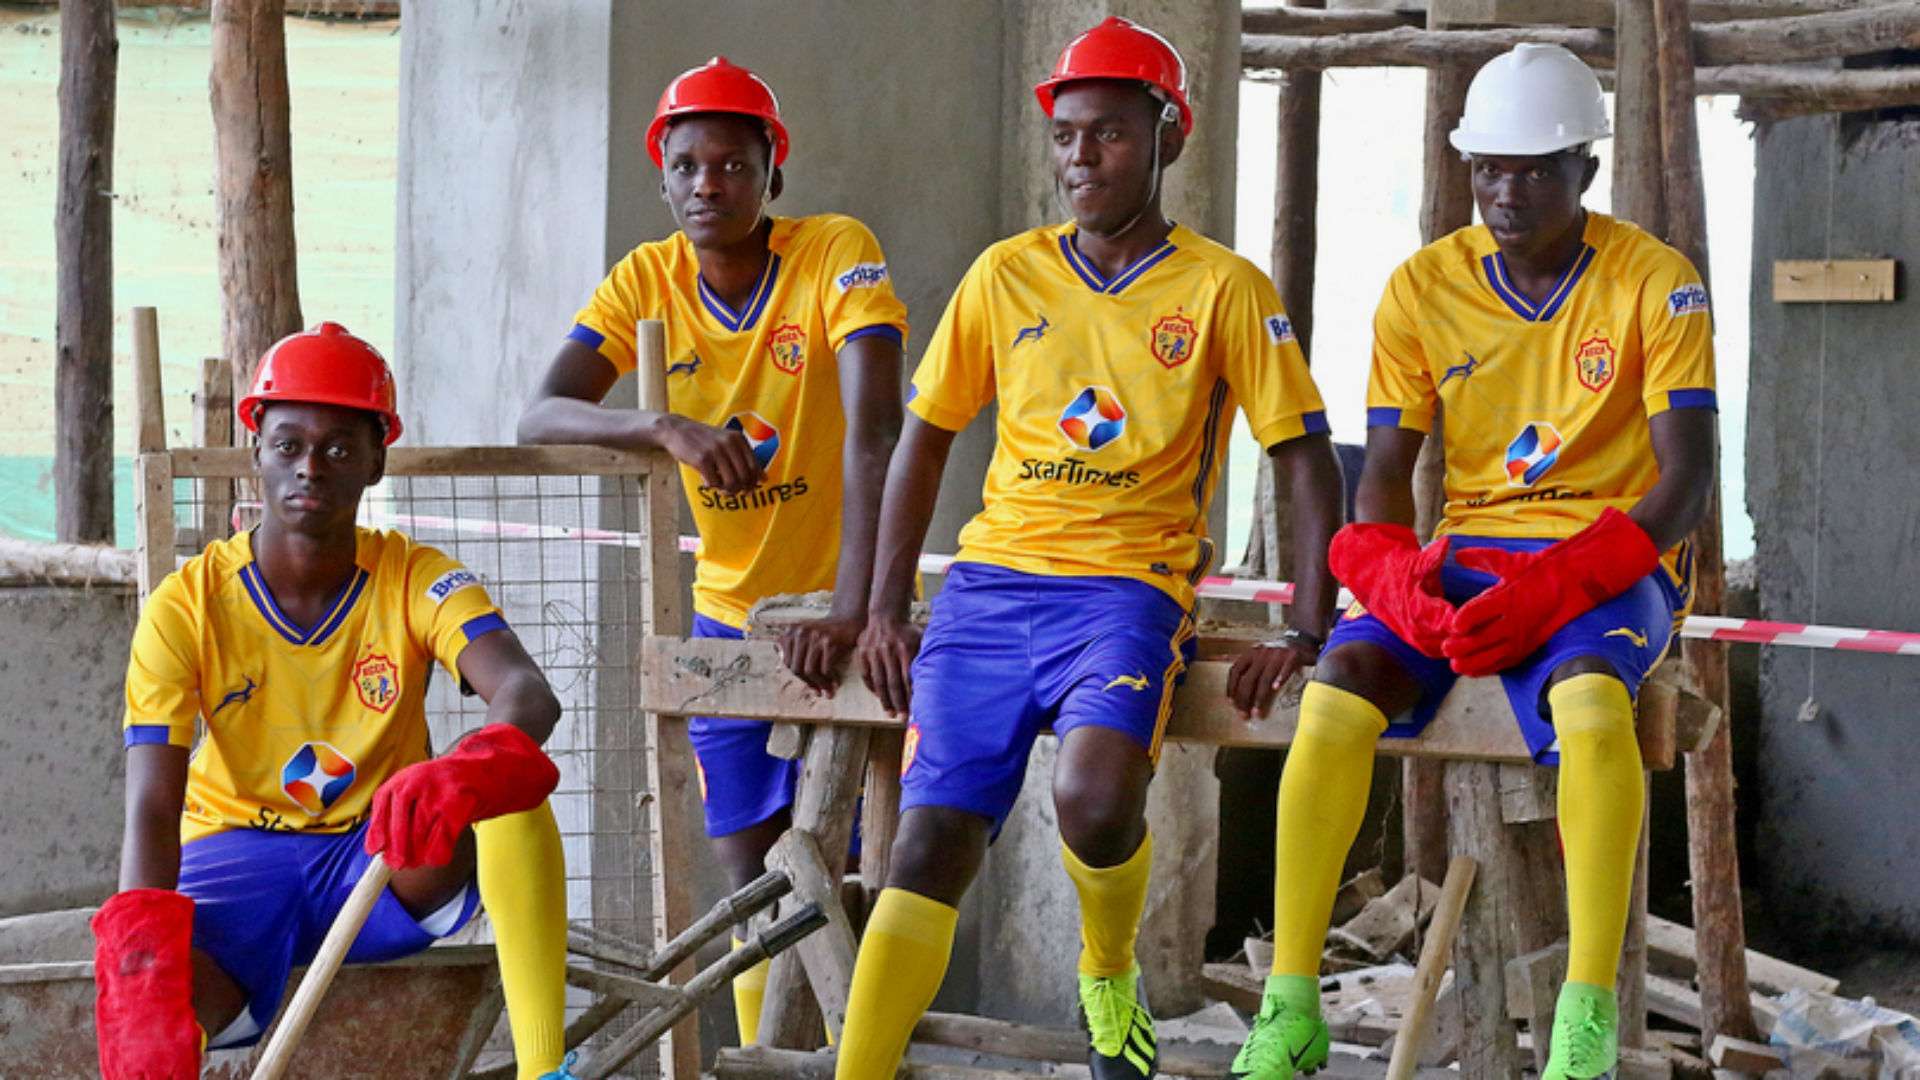 KCCA FC players model new jersey.